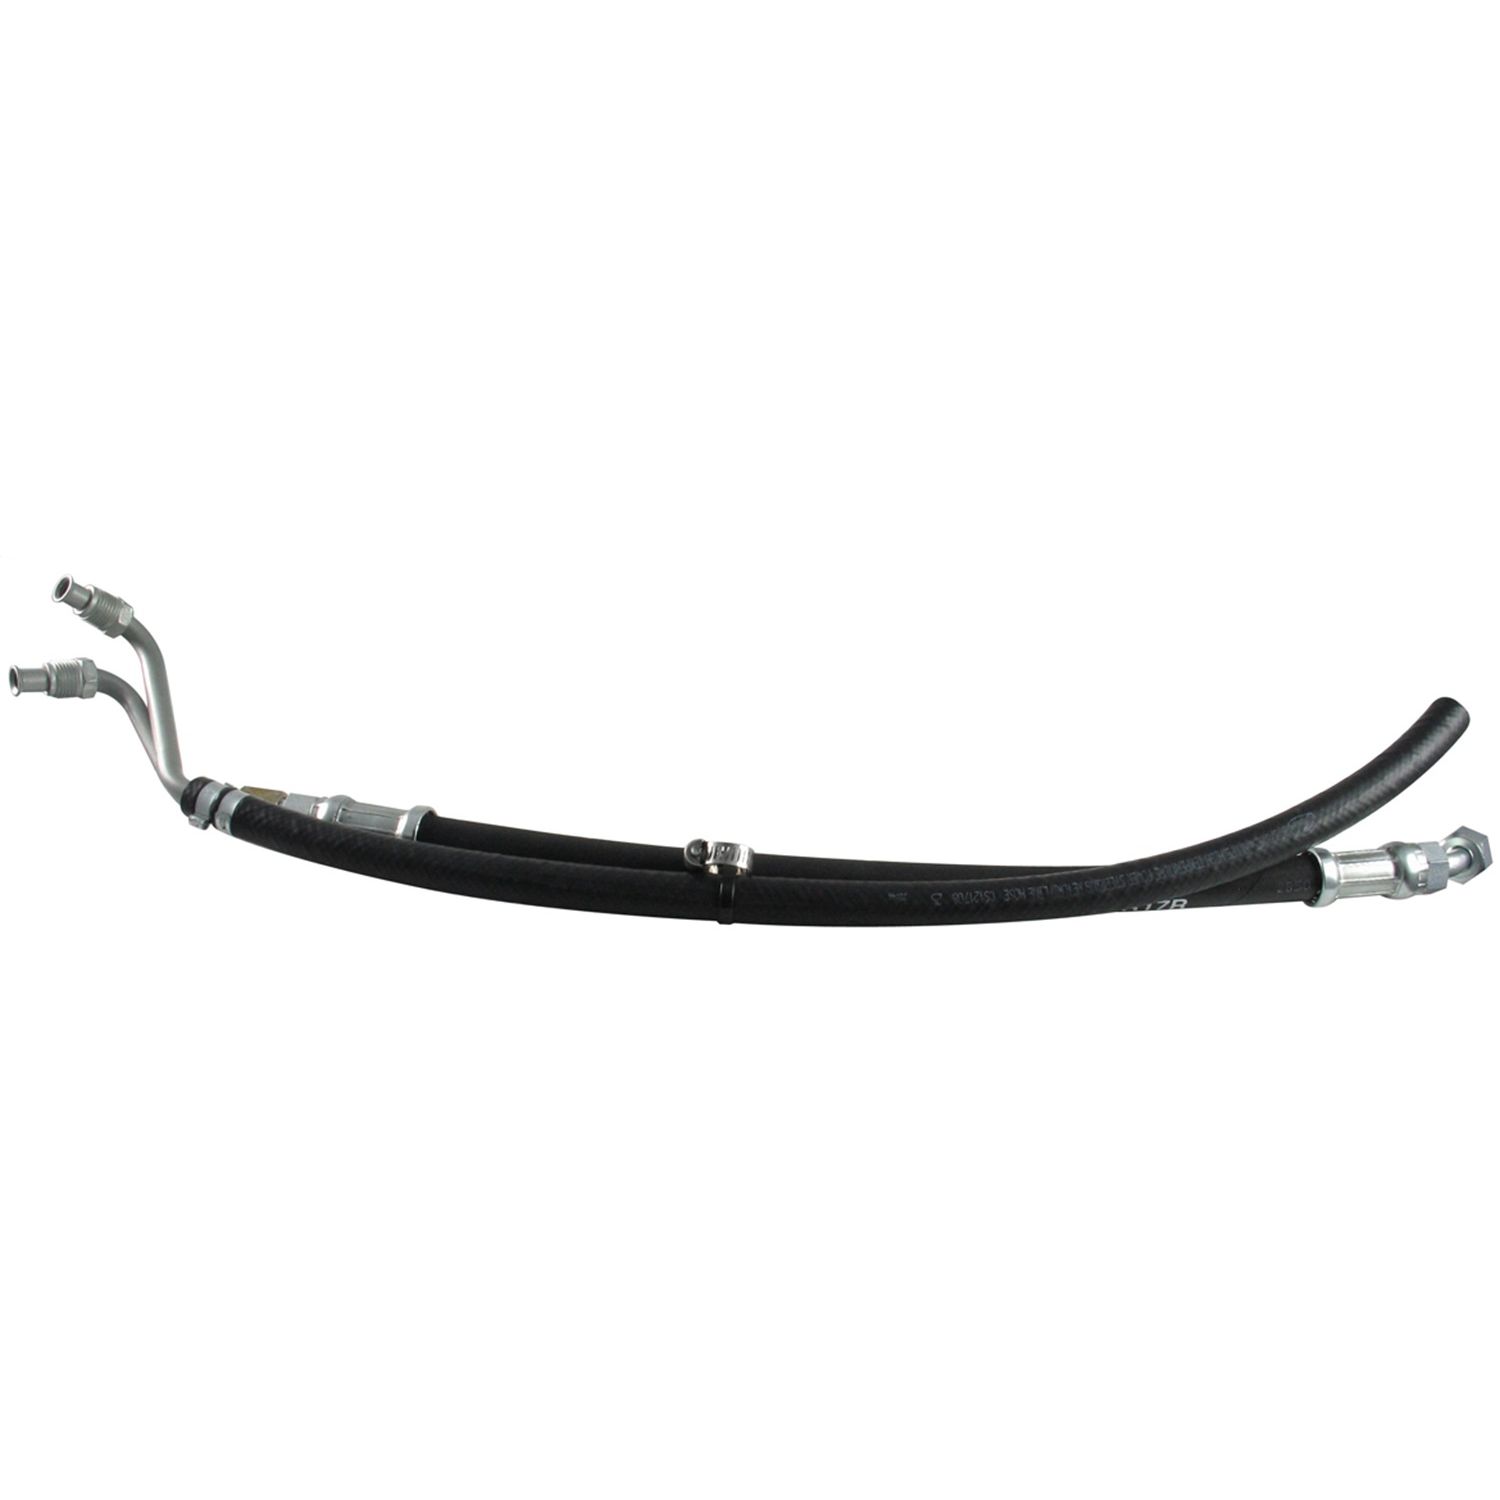 Borgeson - Power Steering Hose Kit - P/N: 925107 - 2 Piece OEM style rubber power steering hose kit. Connects Ford power steering pump to Borgeson Mustang power conversion box. V-8 applications only.